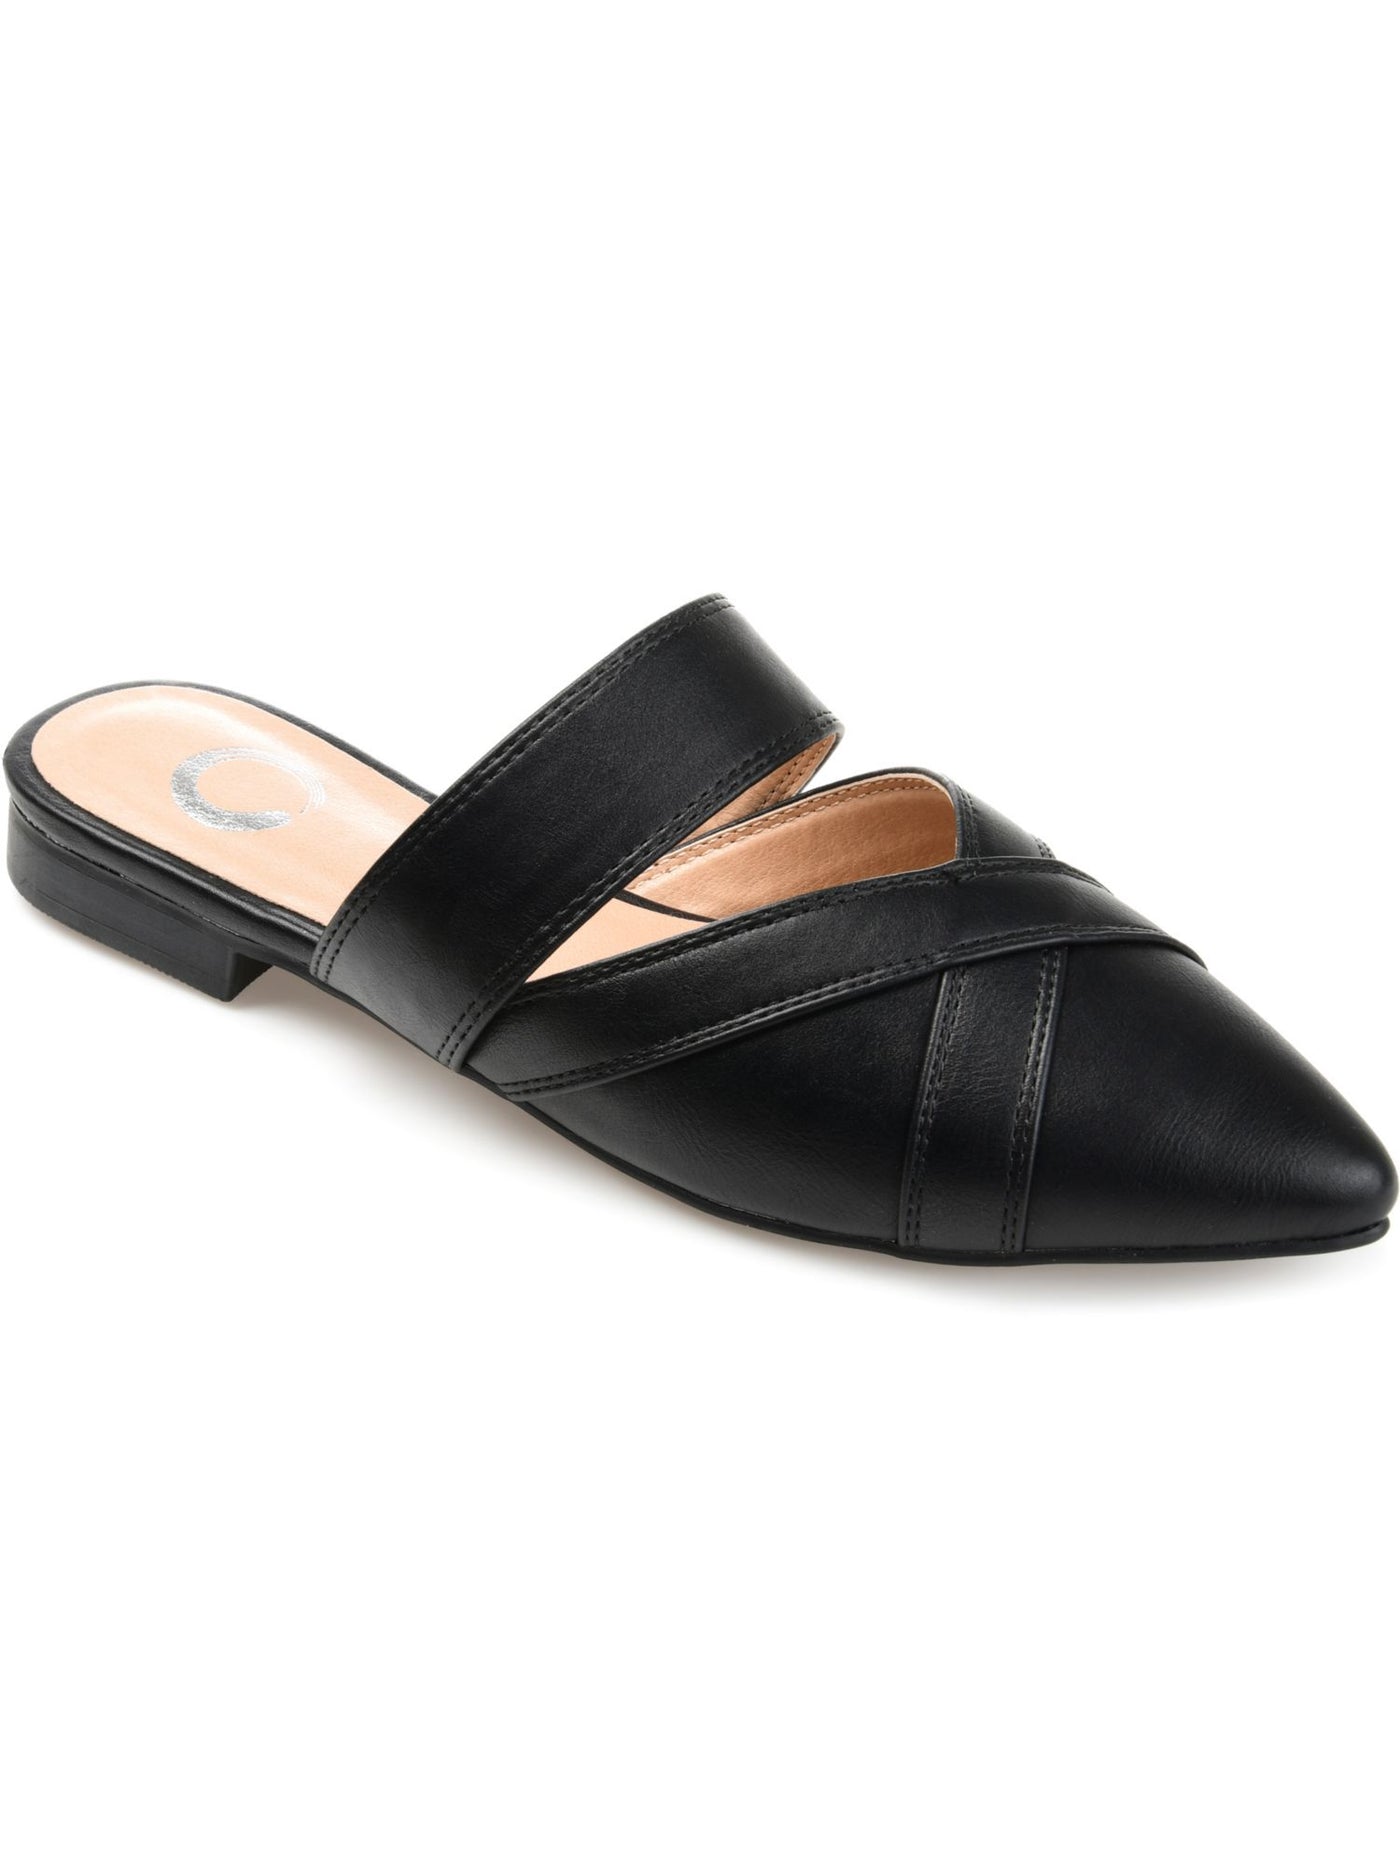 JOURNEE COLLECTION Womens Black Goring Cushioned Stasi Pointed Toe Slip On Mules 8.5